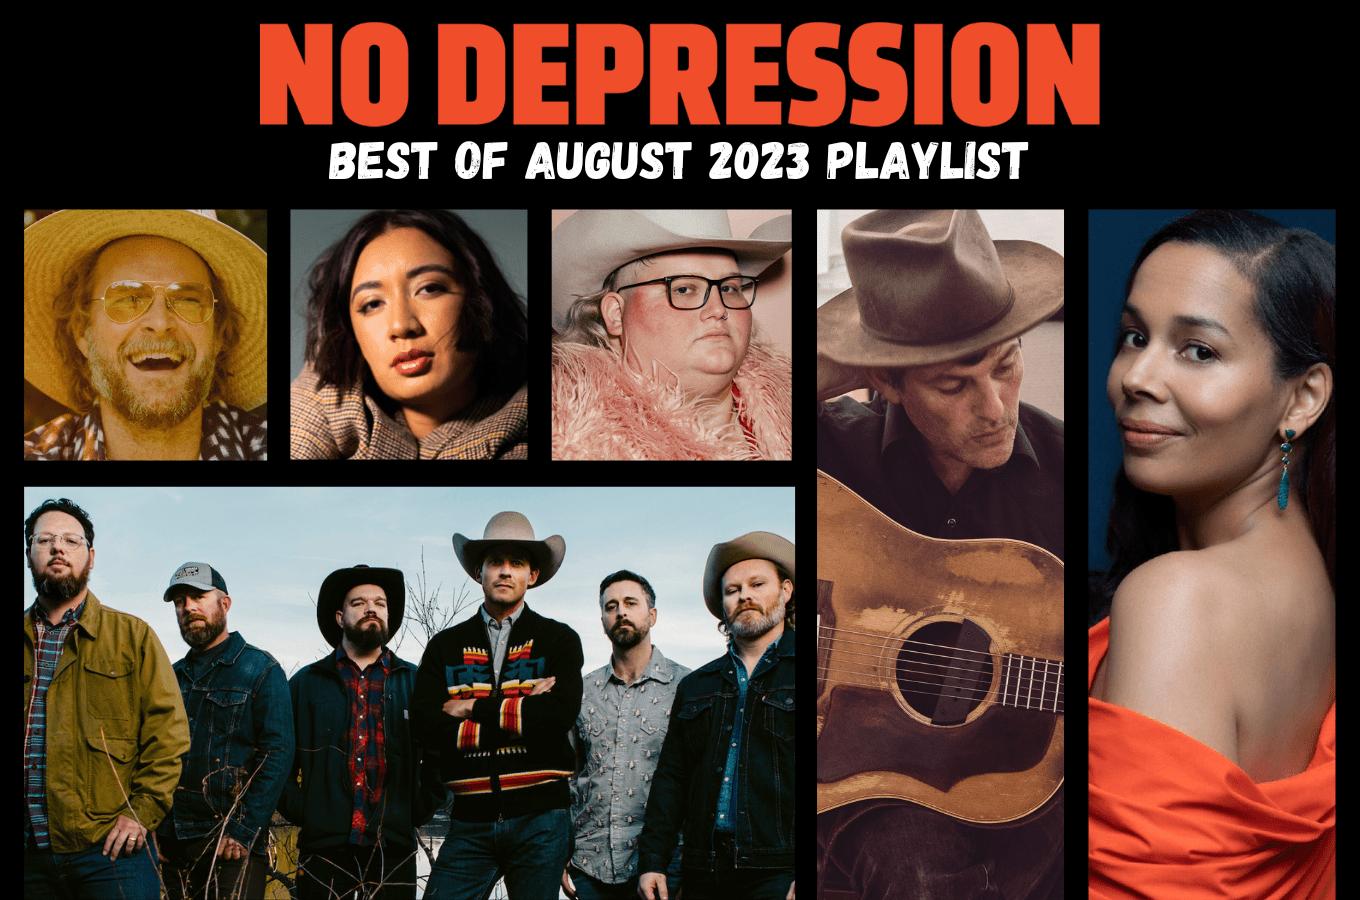 Clockwise from top left, Hiss Golden Messenger, Raye Zaragoza, Joshua Ray Walker, Gregory Alan Isakov, Rhiannon Giddens, and Turnpike Troubadours are featured in No Depression's Best of August 2023 playlist.